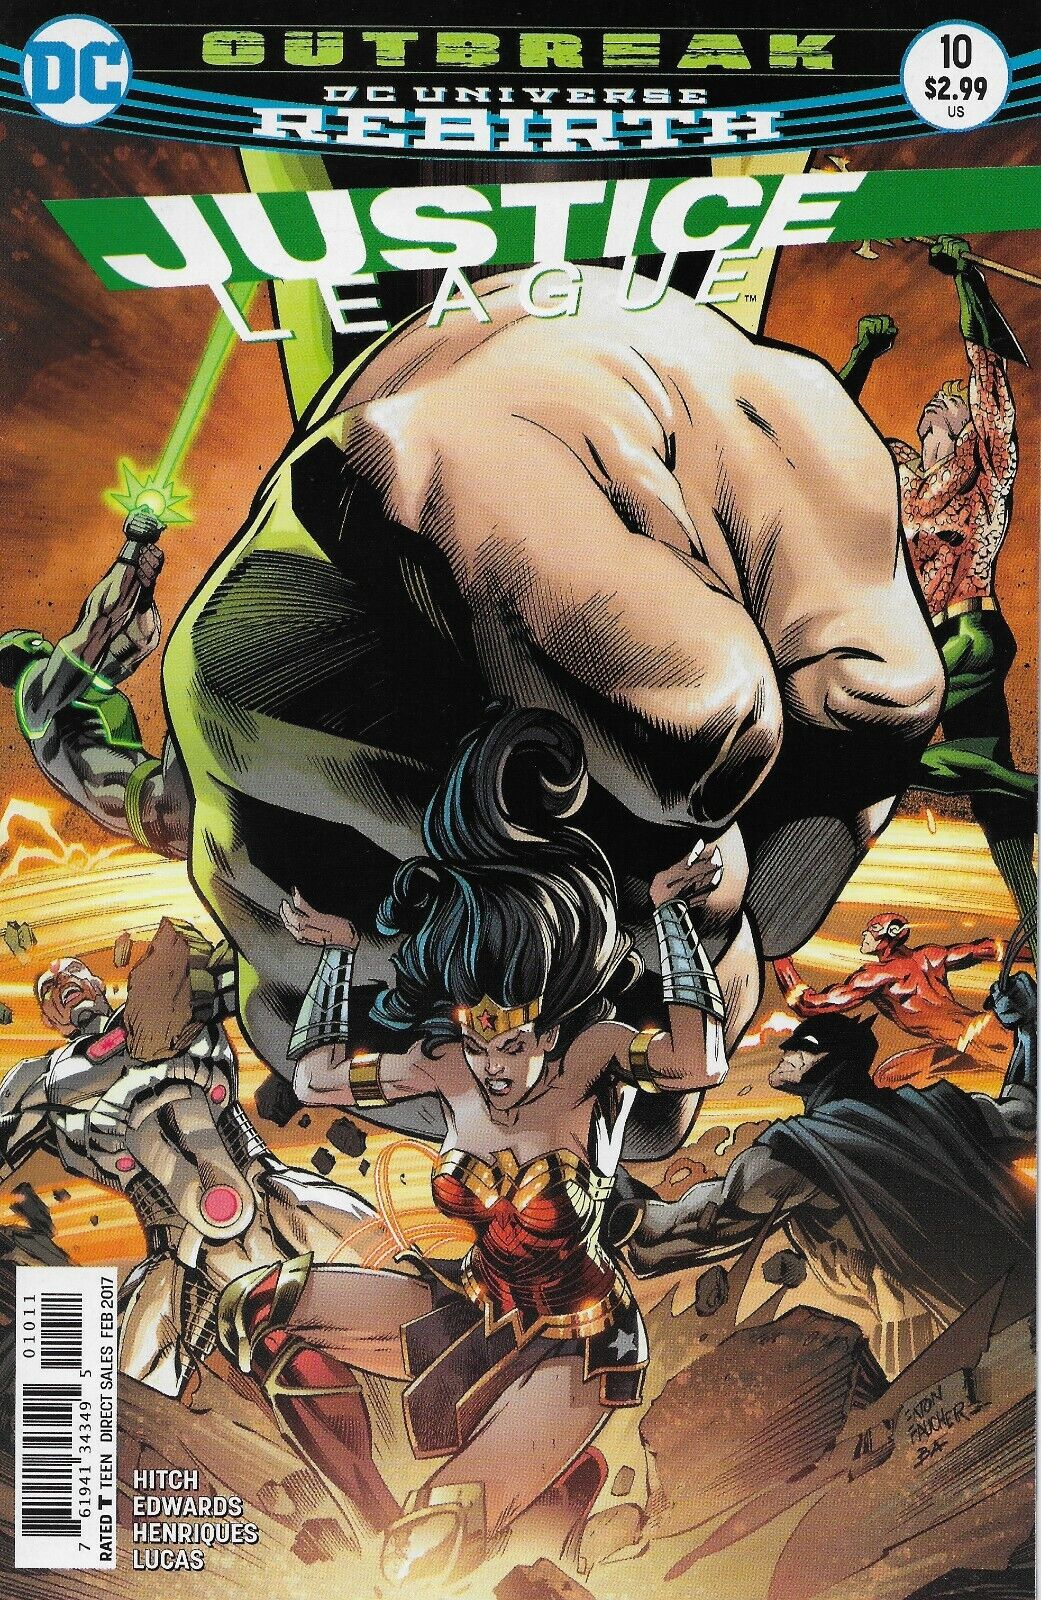 JUSTICE LEAGUE #10 DC COMICS 2017 BAGGED AND BOARDED